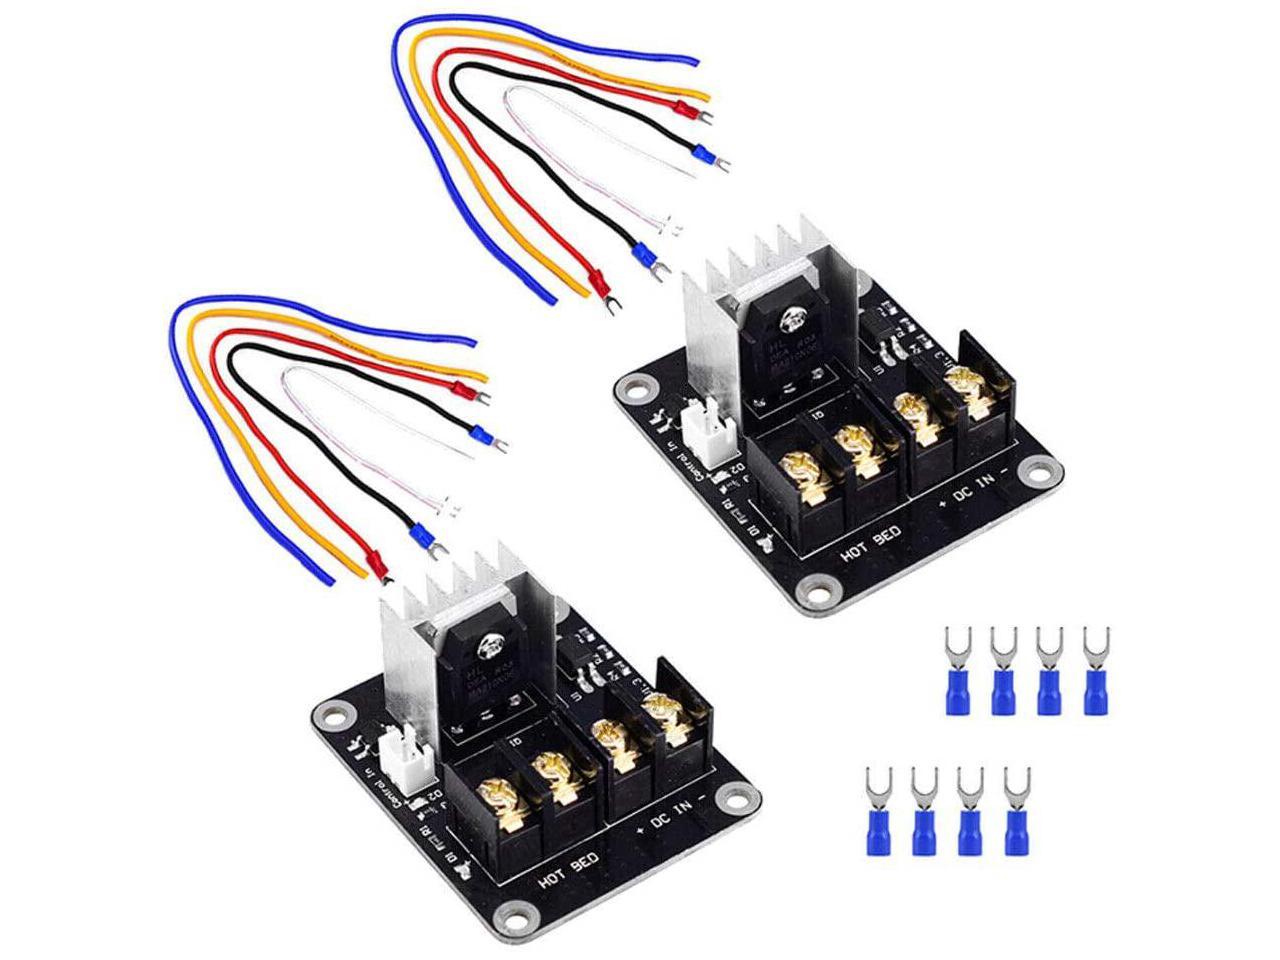 2pcs ANET A8 MOSFET Board Upgrade 3D Printer Heated Bed Power Module i3 t QVZ 